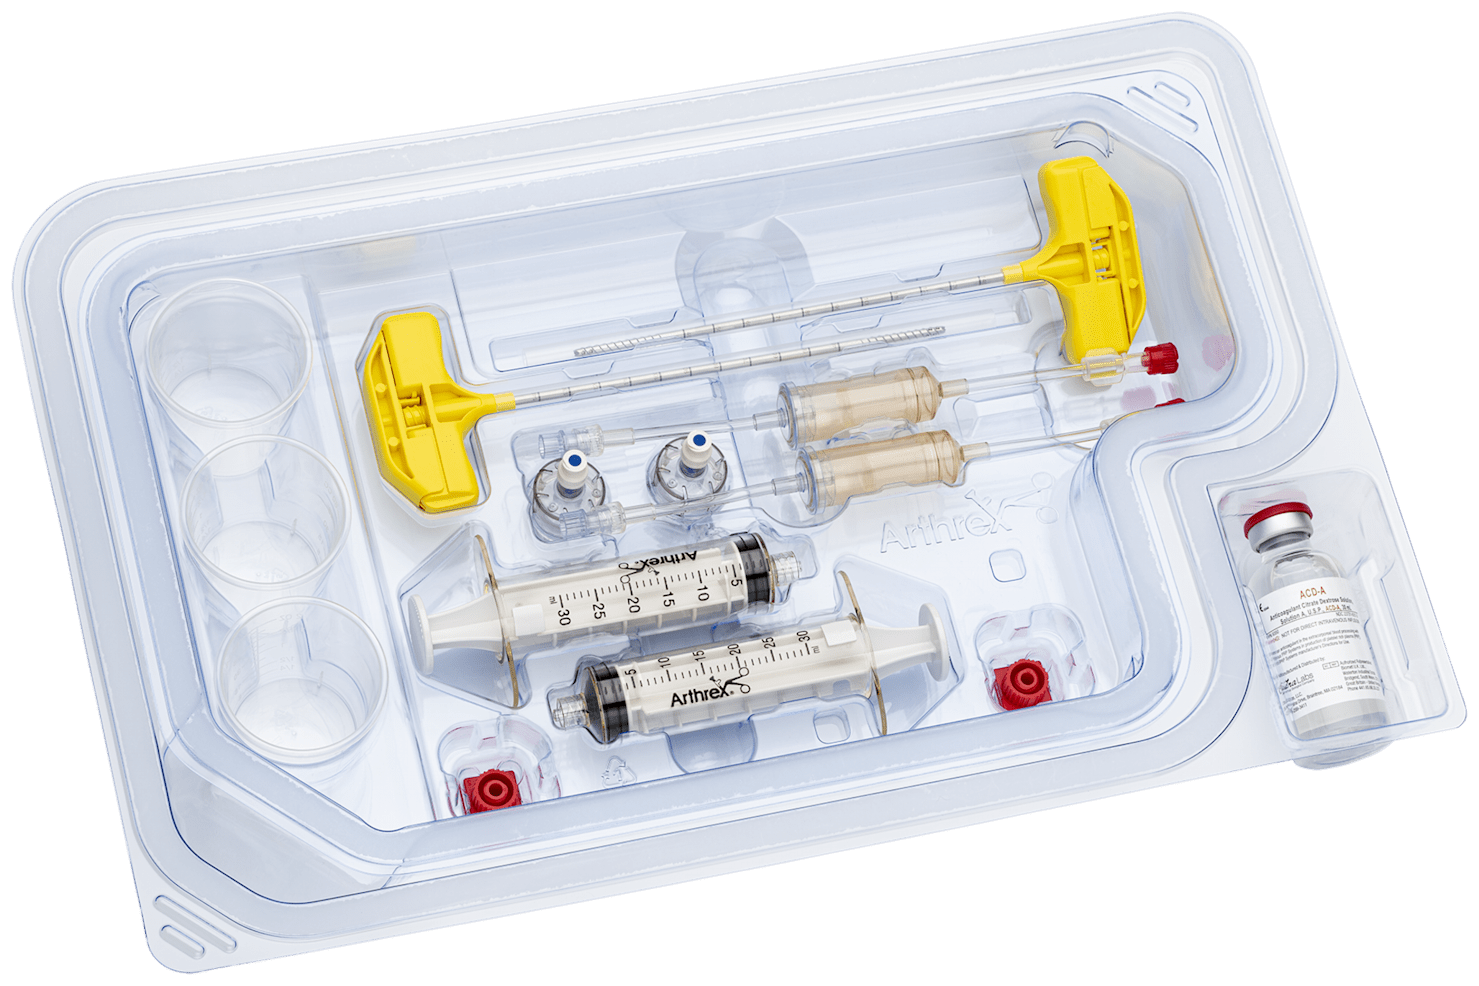 13G Open Tip Aspiration Kit With Angel cPRP System and ACD-A